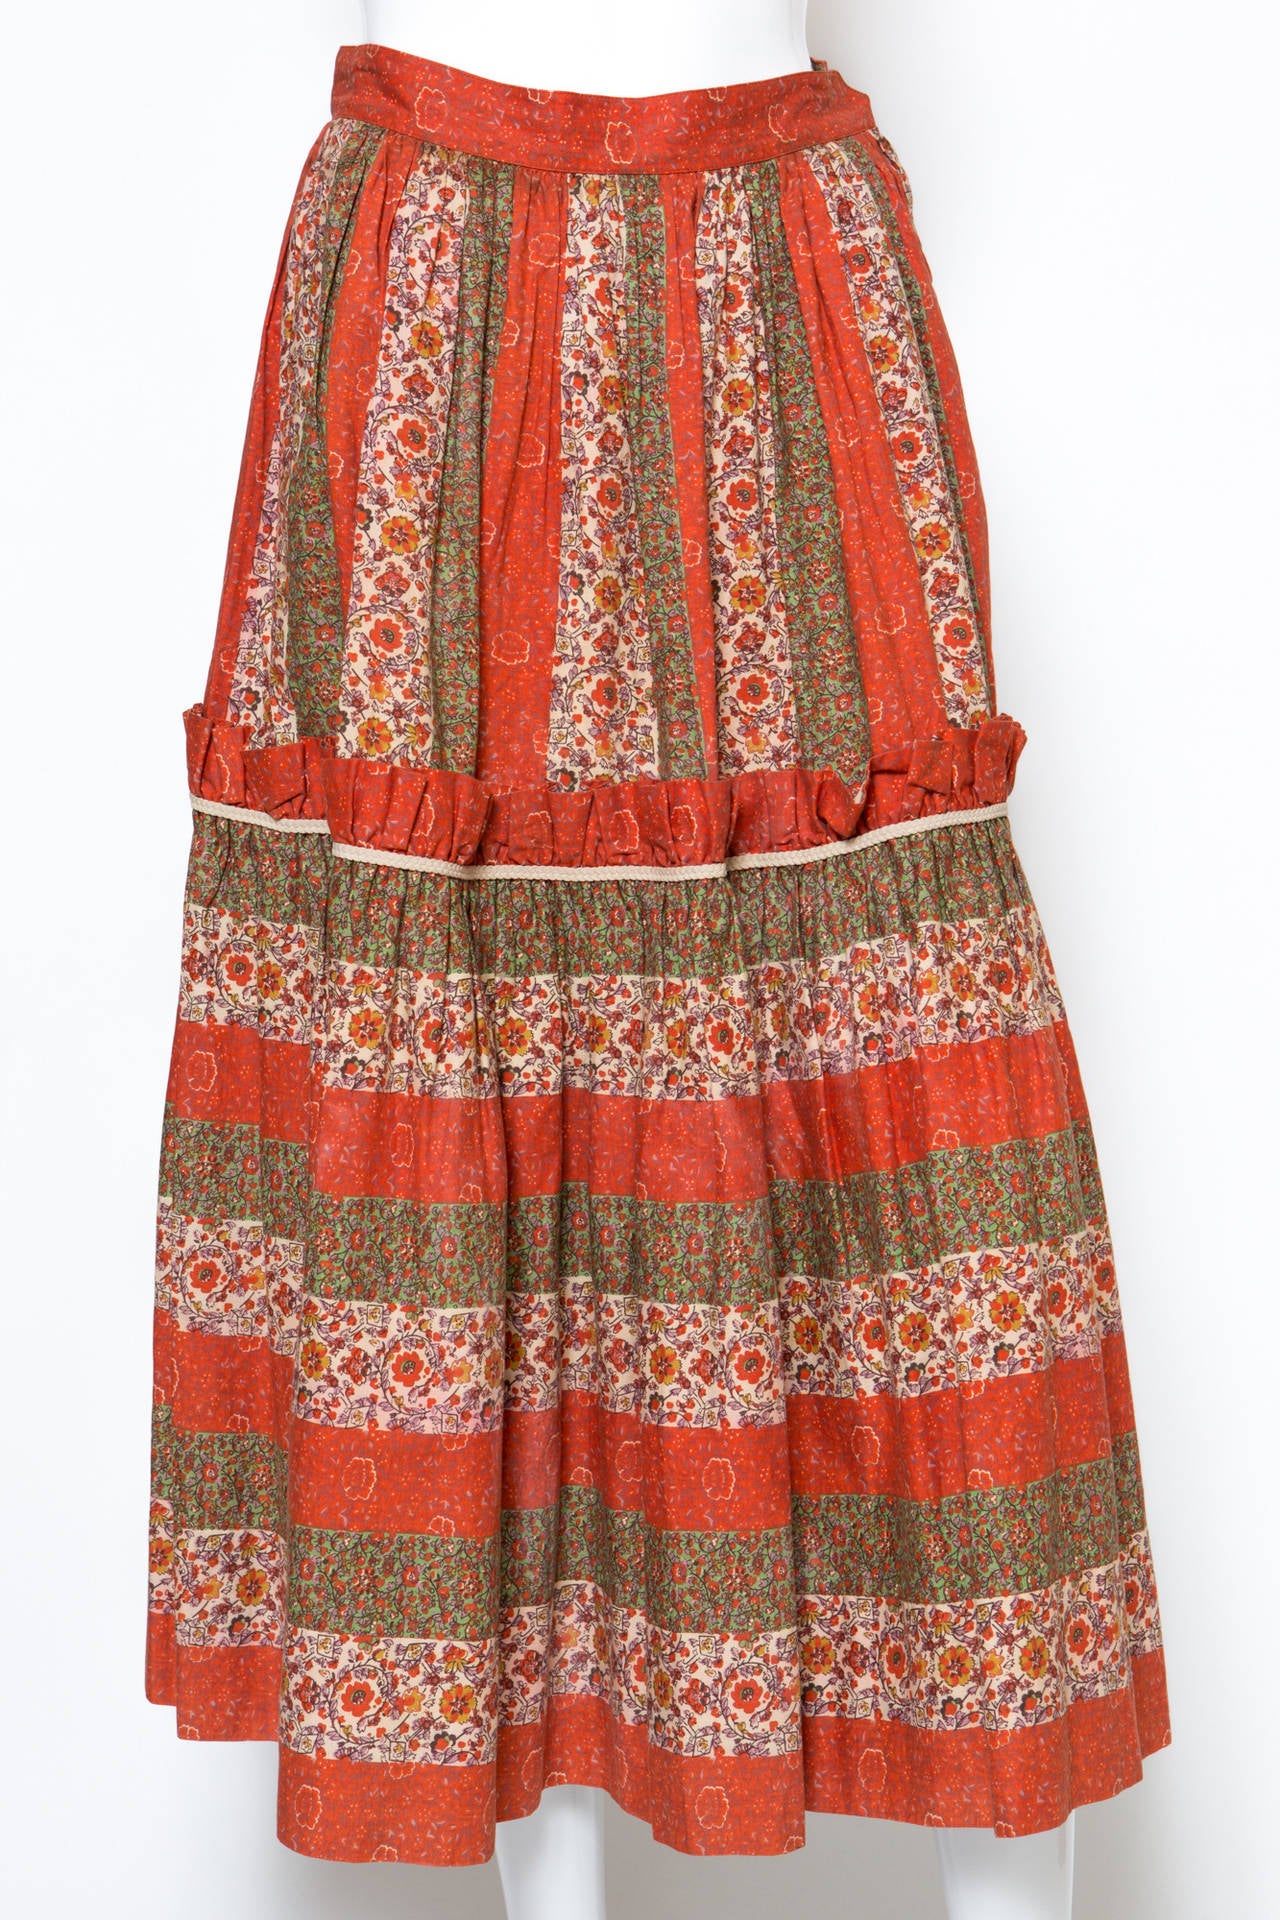 Gorgeous multicolour cotton floral print peasant skirt from Yves Saint Laurent gets a waistband, a pleated design and side pockets.
In excellent vintage condition. Made in France.
We guarantee you will receive this skirt as described and showed on